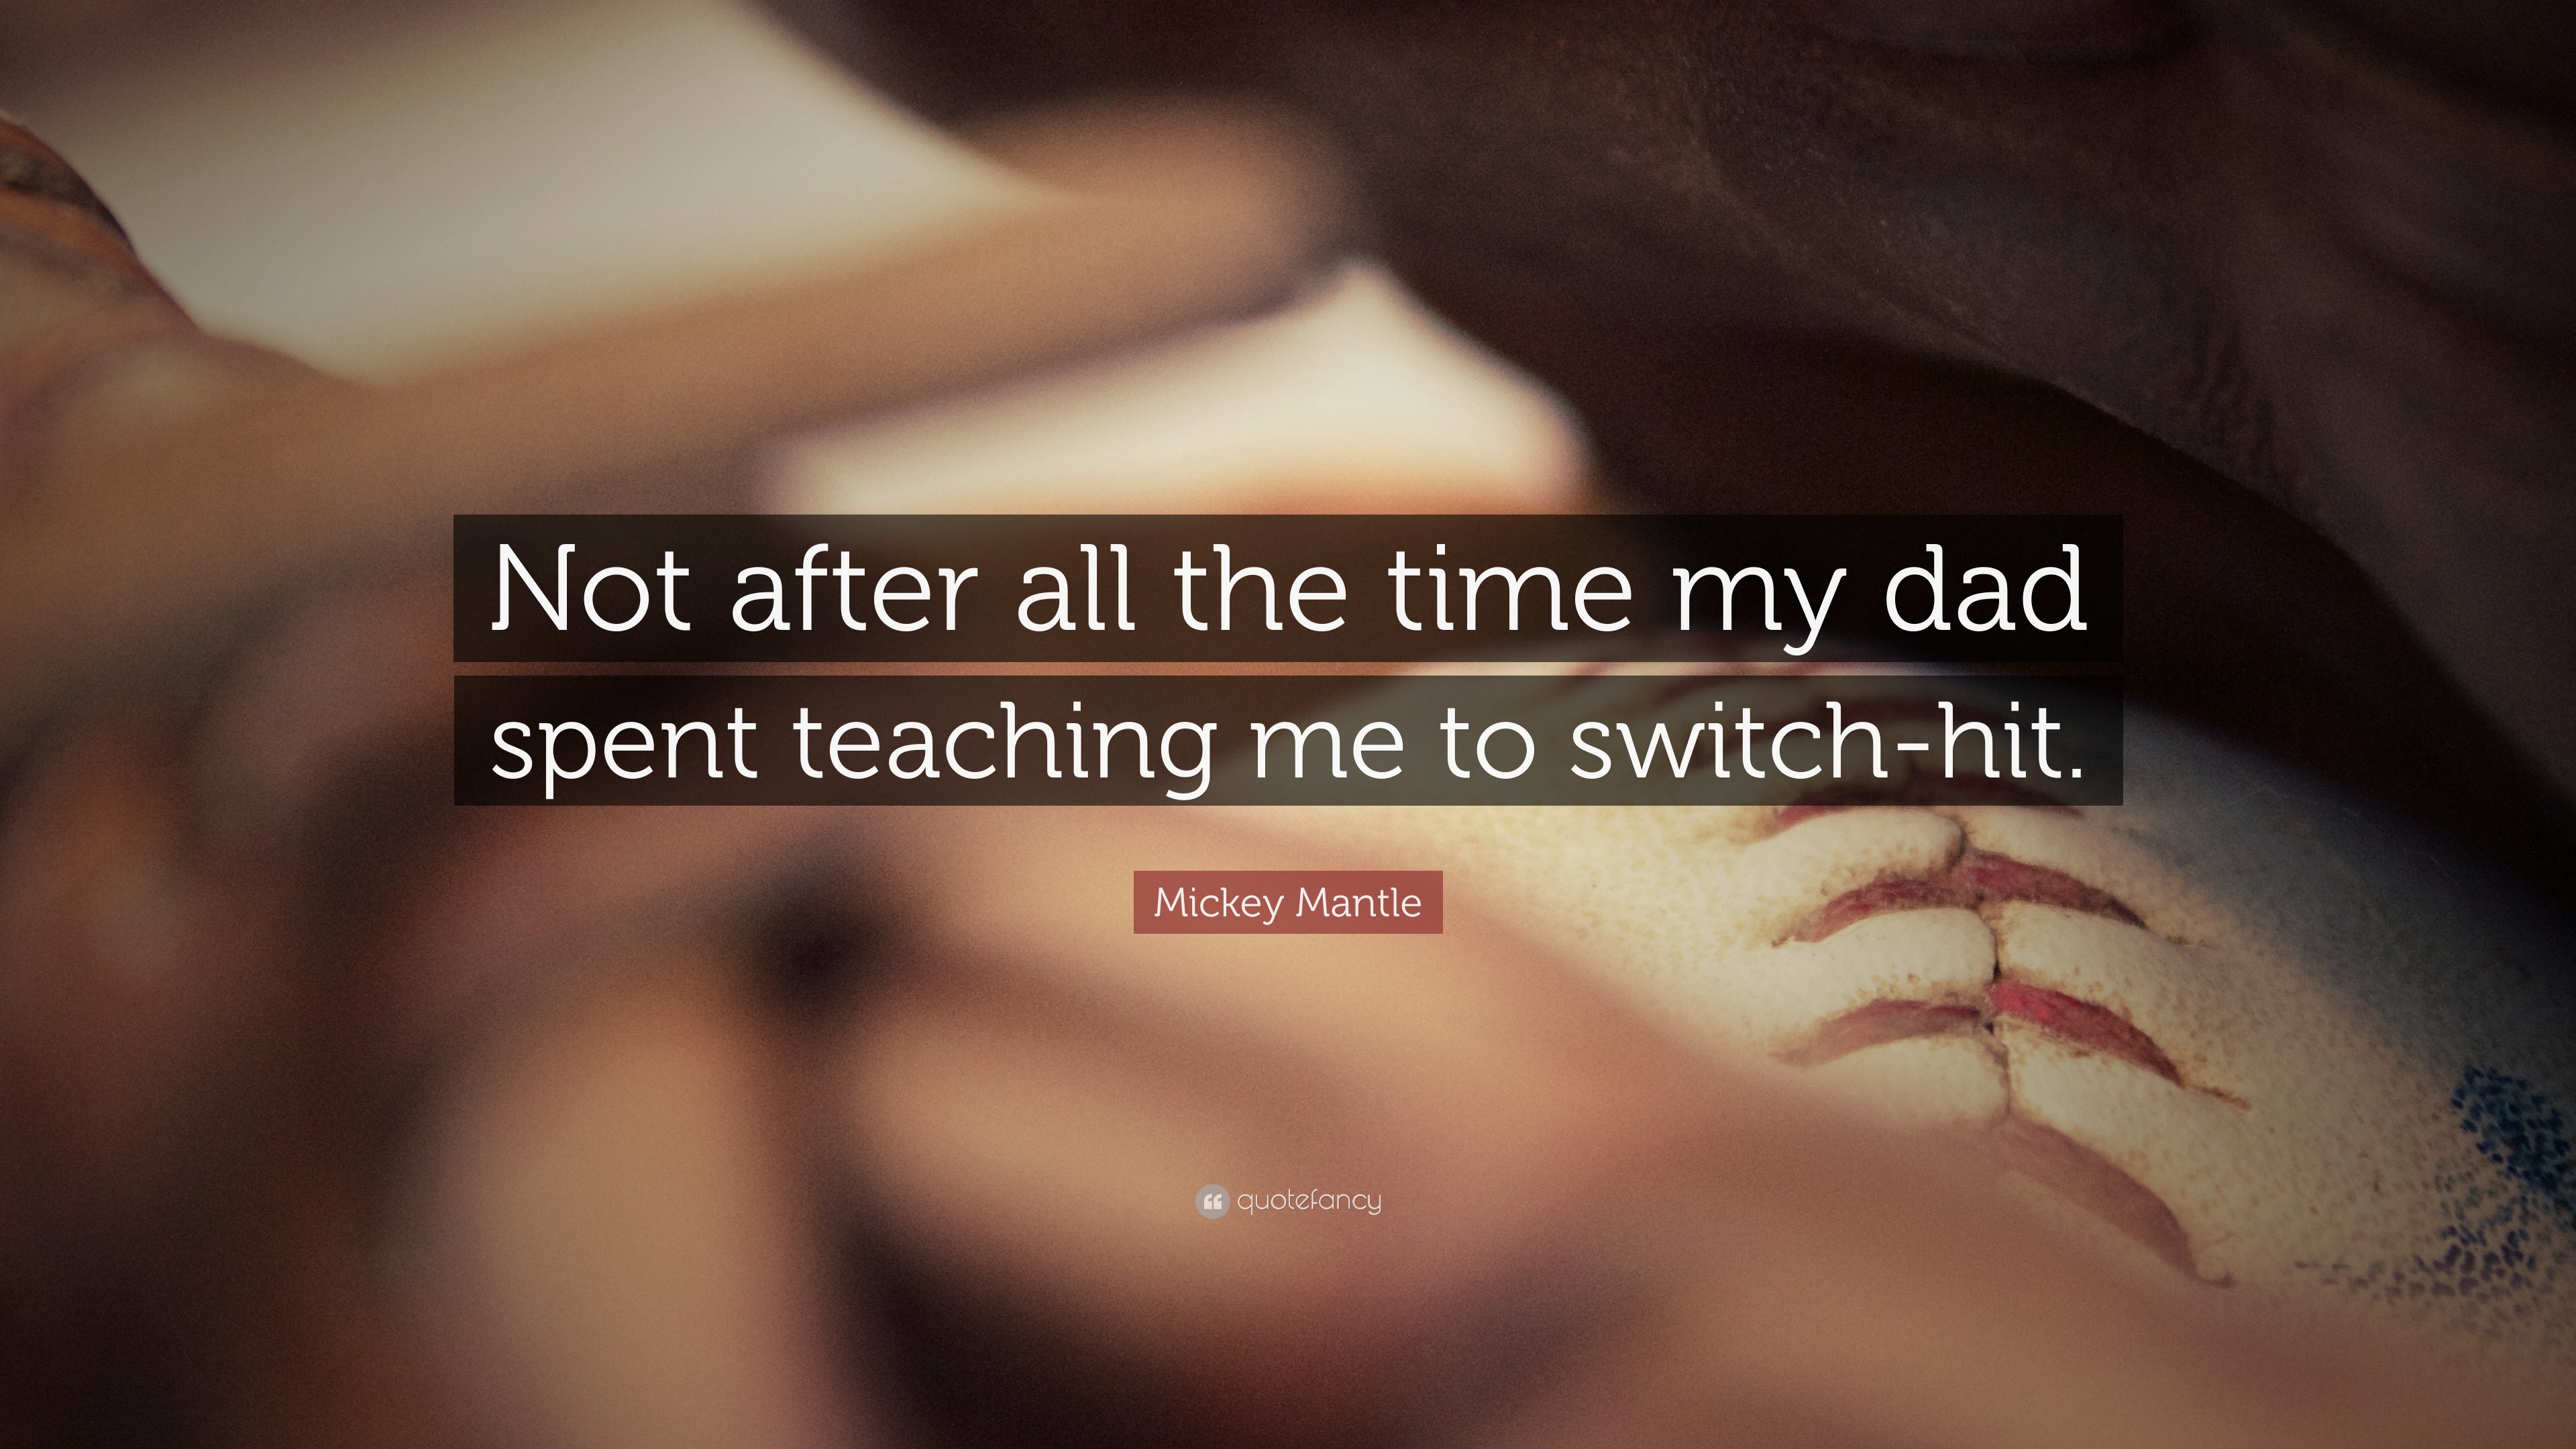 Mickey Mantle Quote: "Not after all the time my dad spent teaching me ...